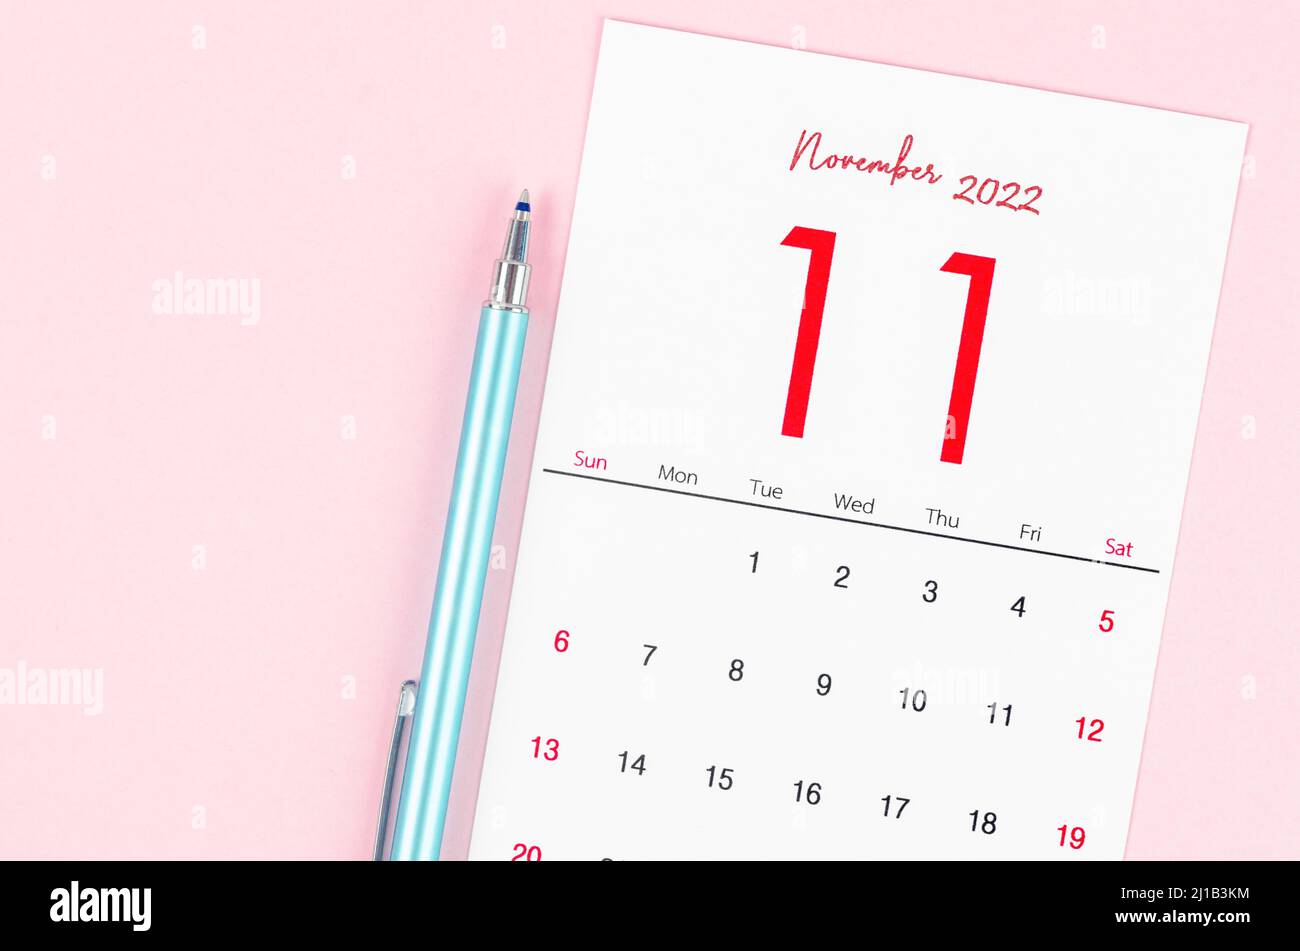 The November 2022 calendar with pen on pink background. Stock Photo